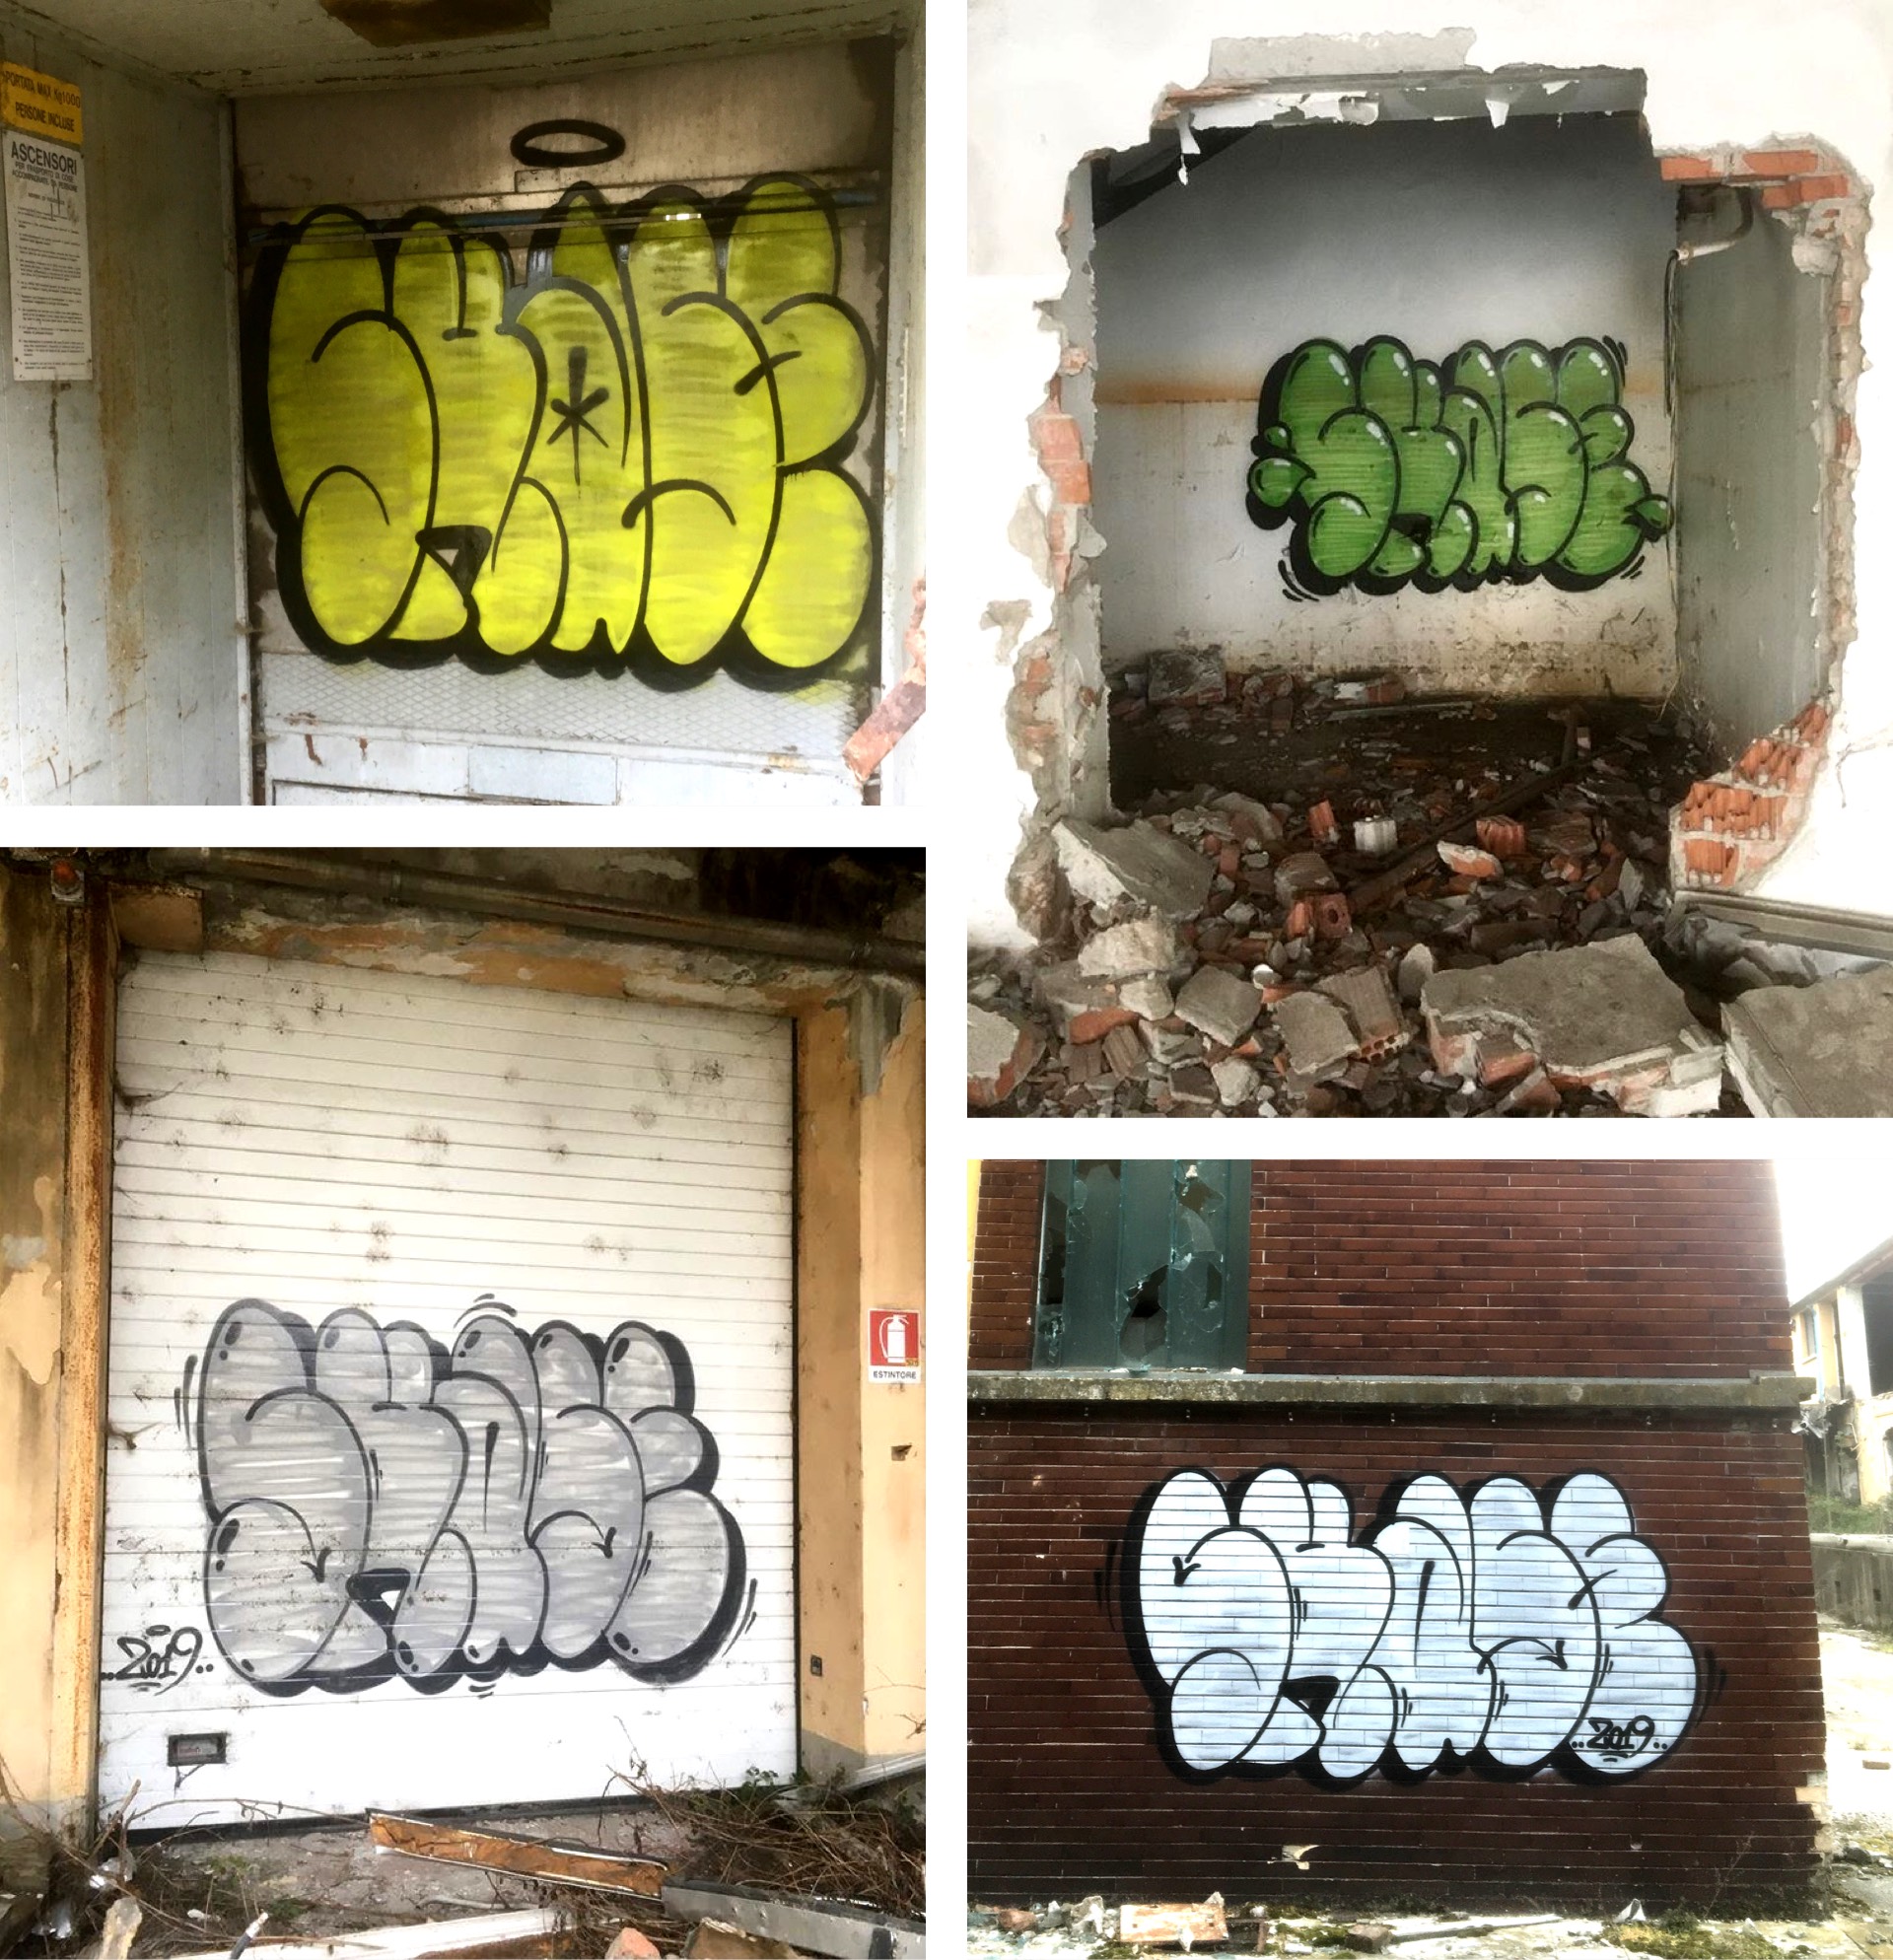 Throwups by Skase